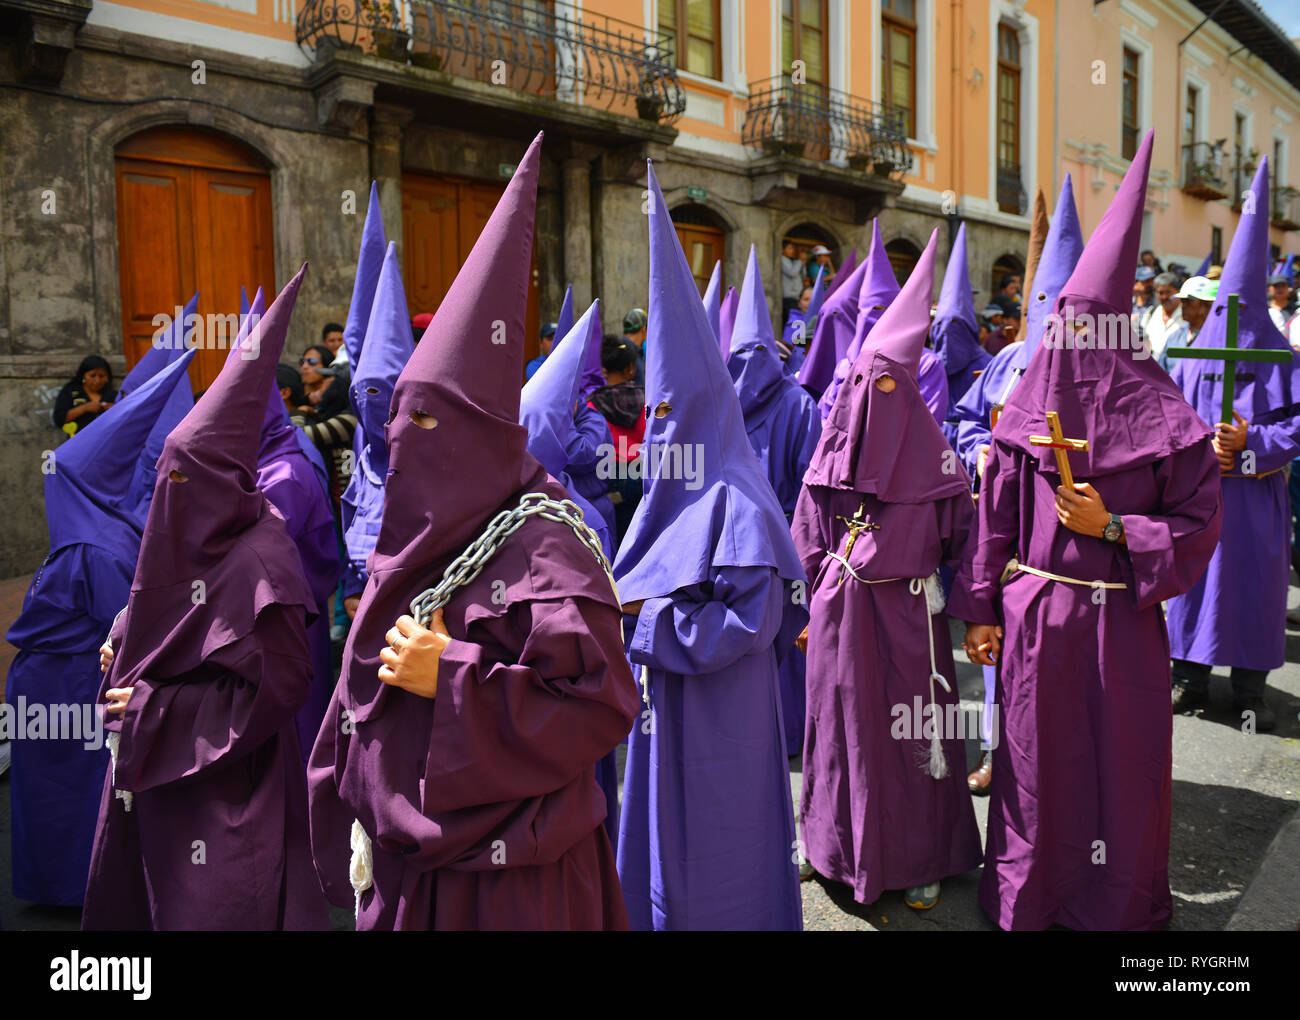 The catholic procession of the penitent cucuruchos ith purple clothing in Quito during Easter on Holy Friday, Ecuador. Stock Photo